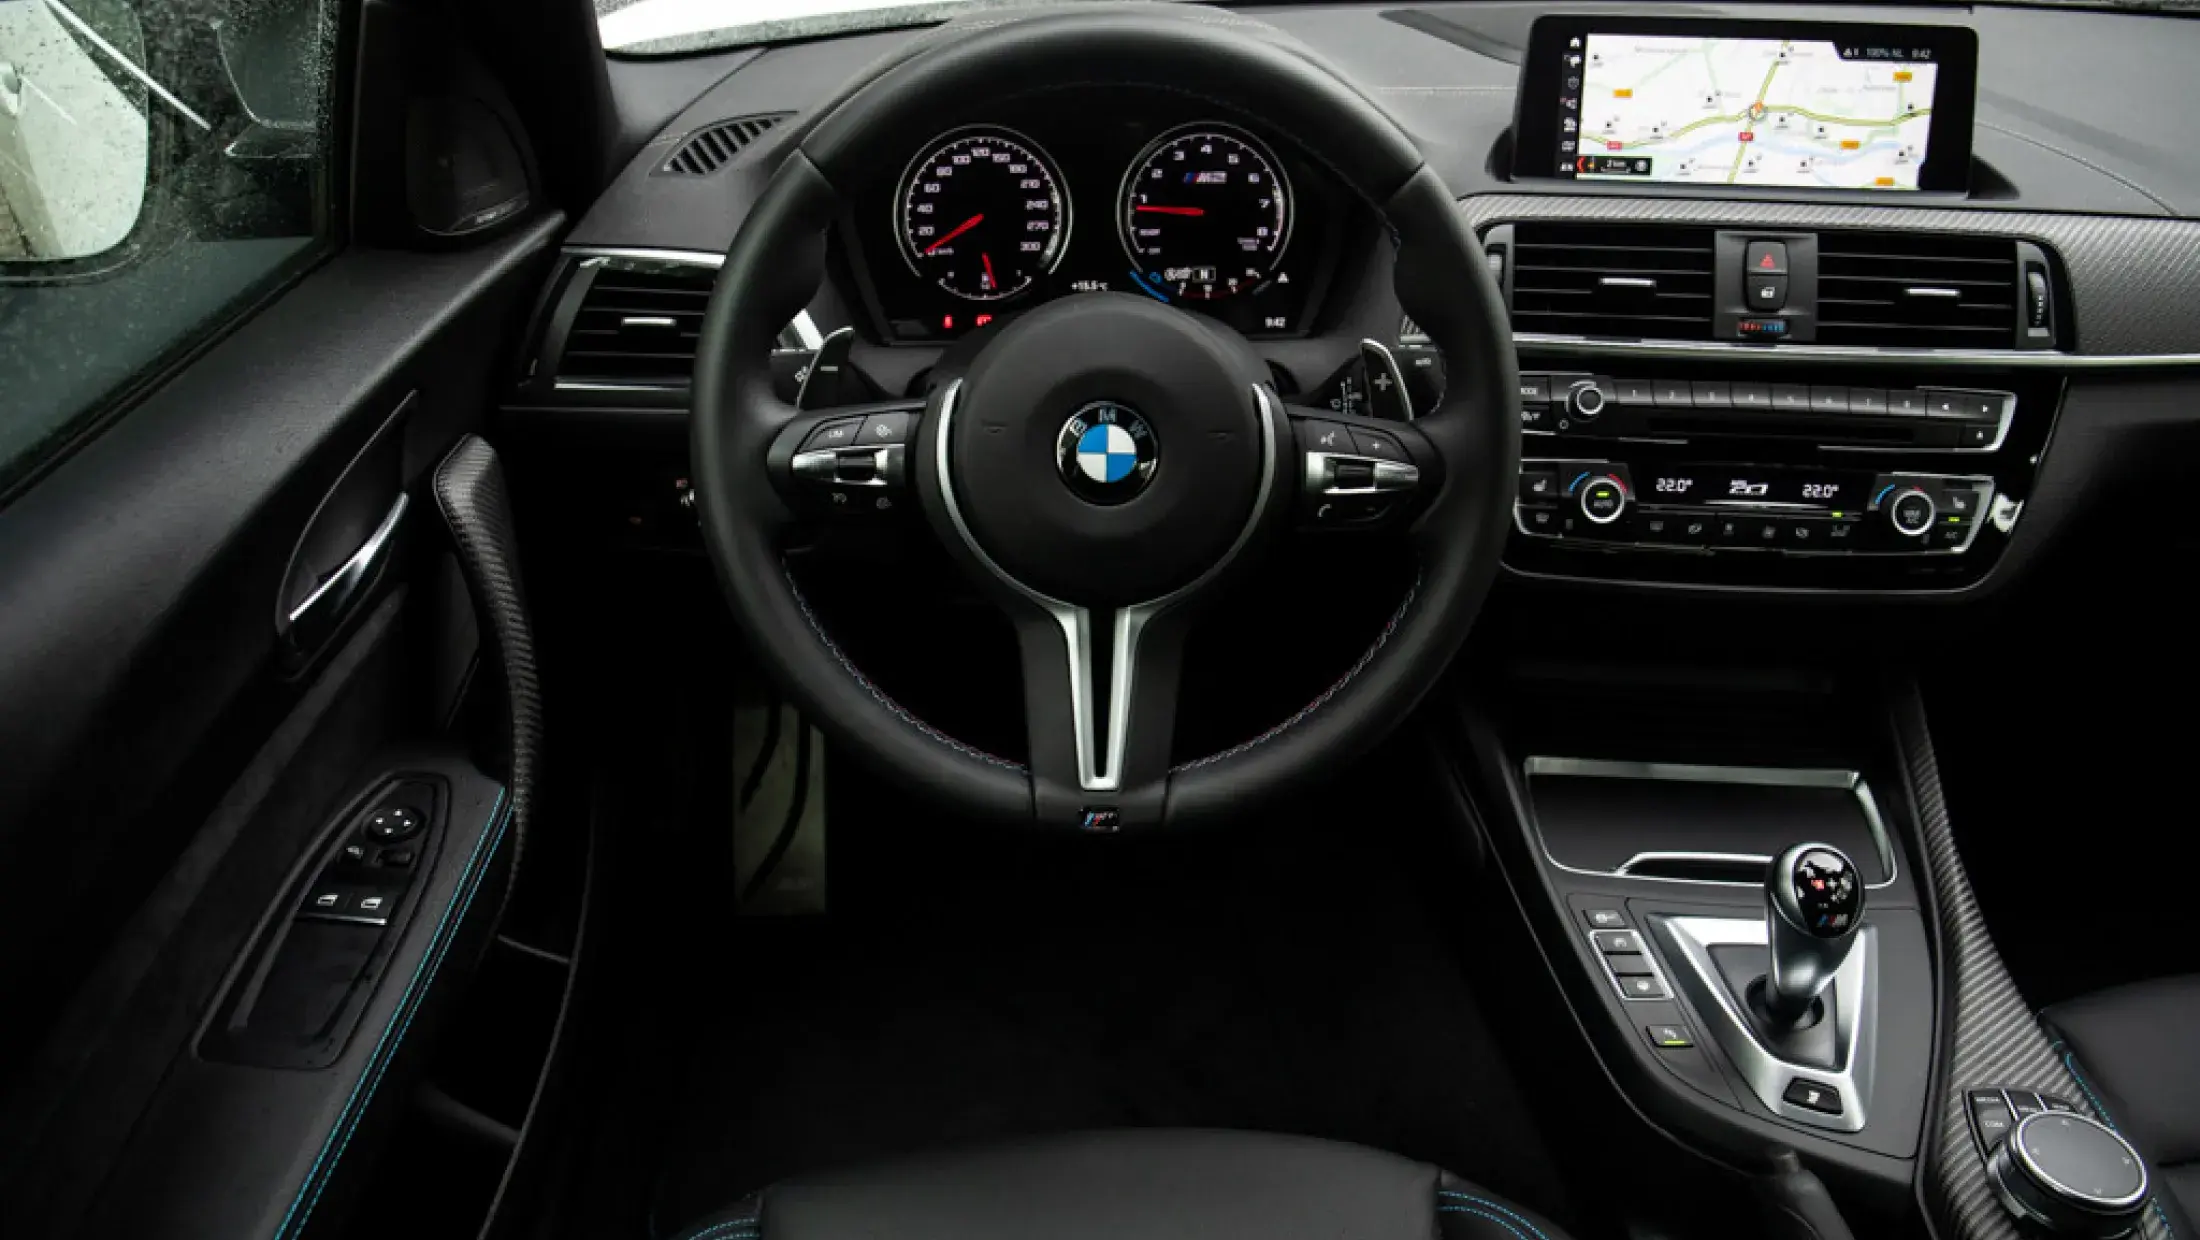 BMW M2 Coupé DCT Competition M-Drivers Package ALpinweiss III F87 Bergwerff